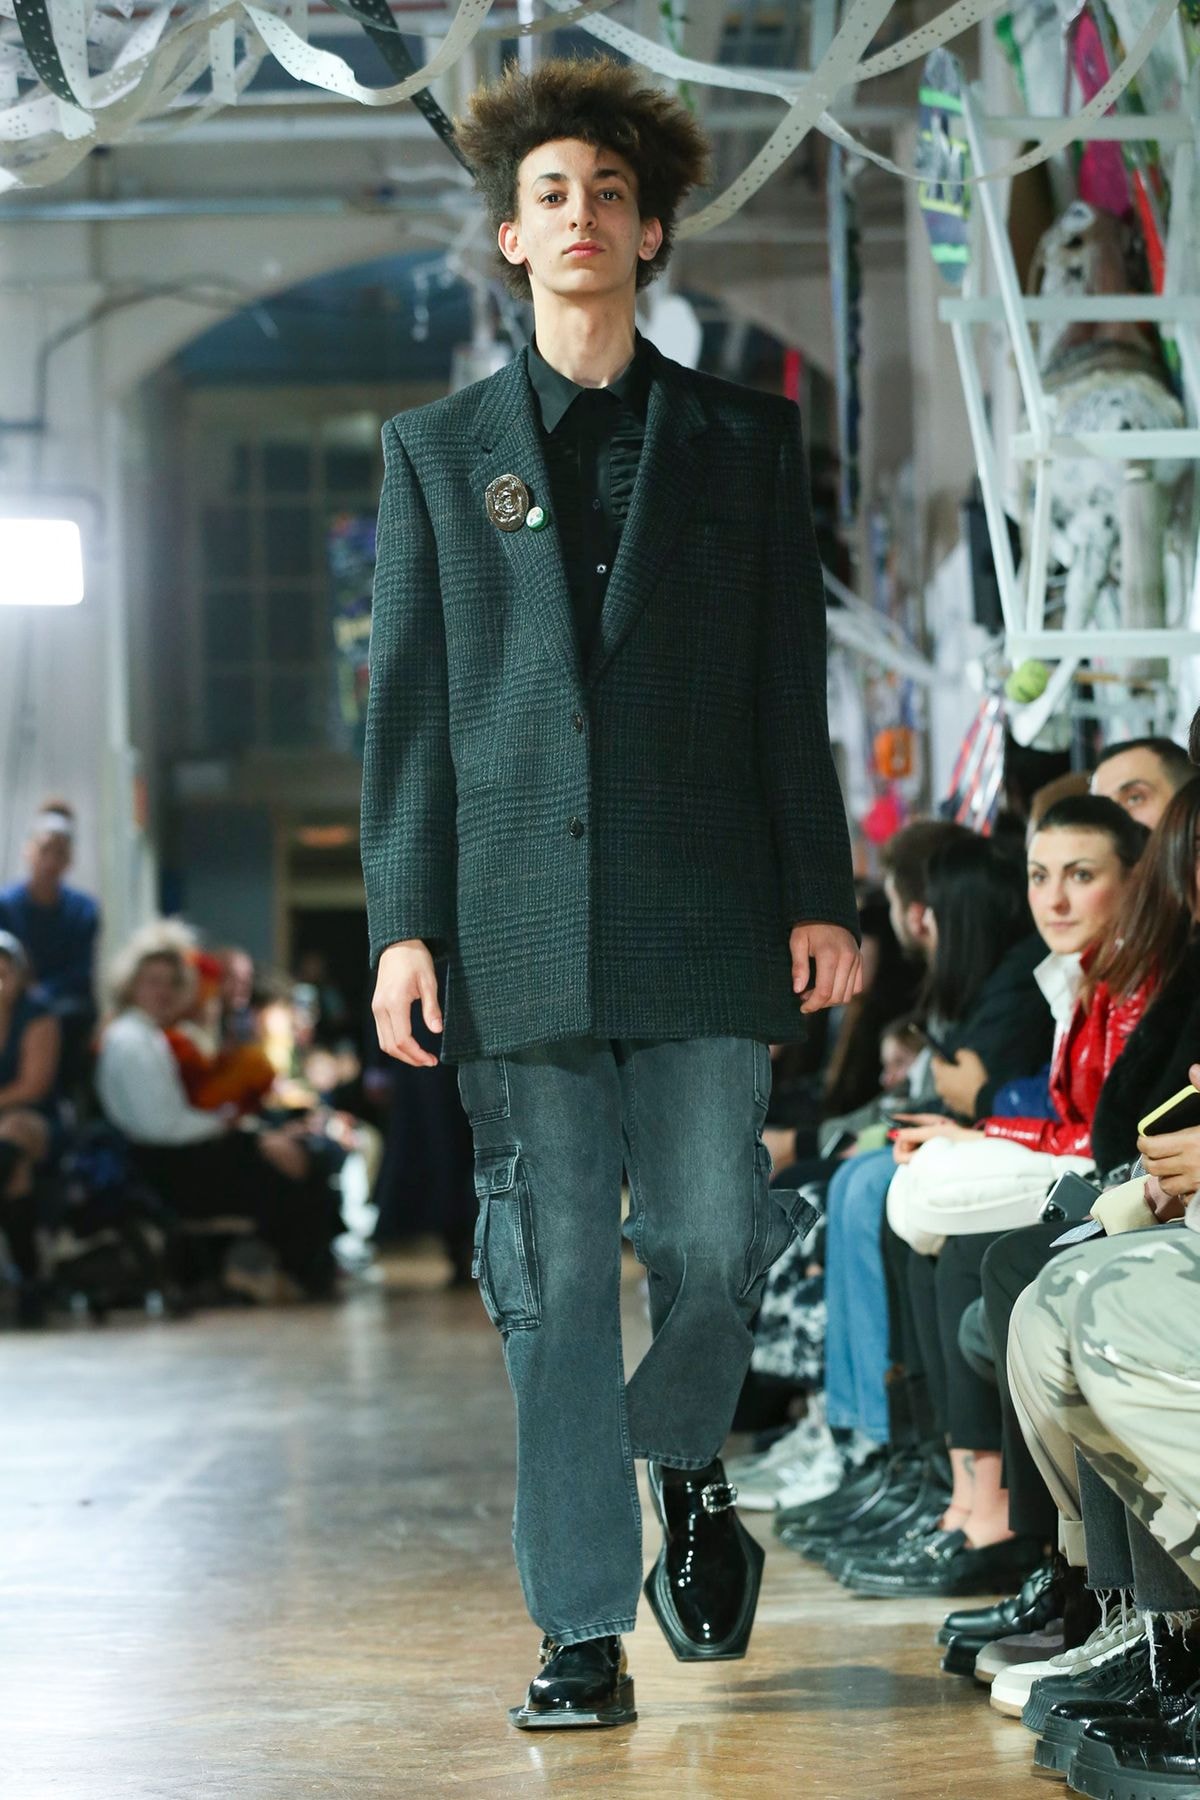 Menswear designer Martine Rose: 'Fashion used to be for outsiders', Men's  fashion